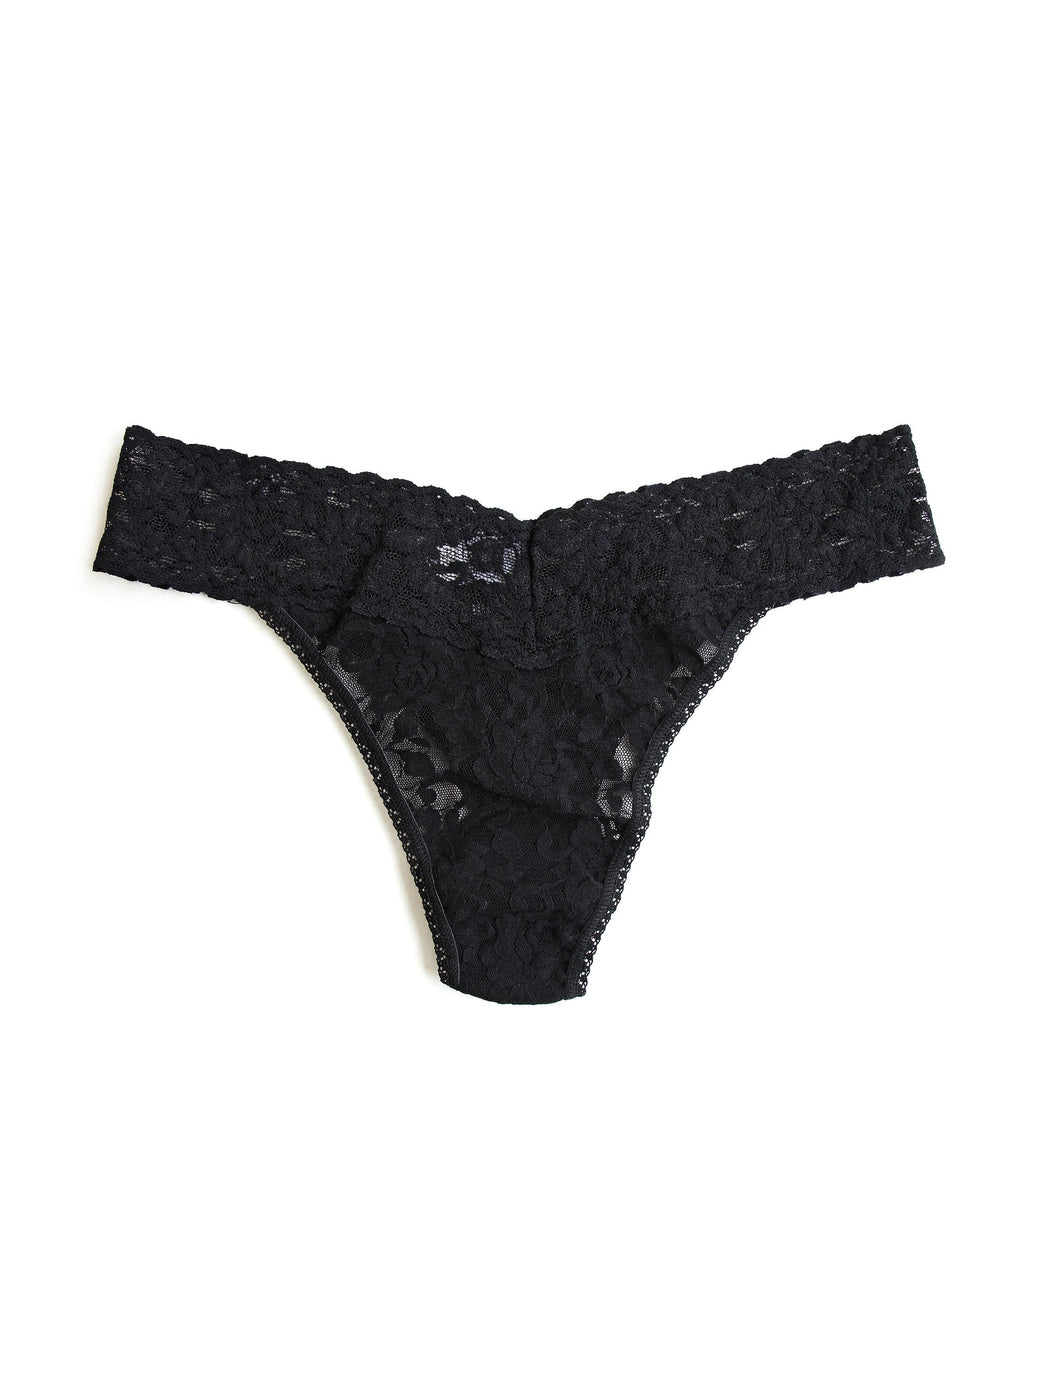 HANKY PANKY Original stretch-lace mid-rise thong